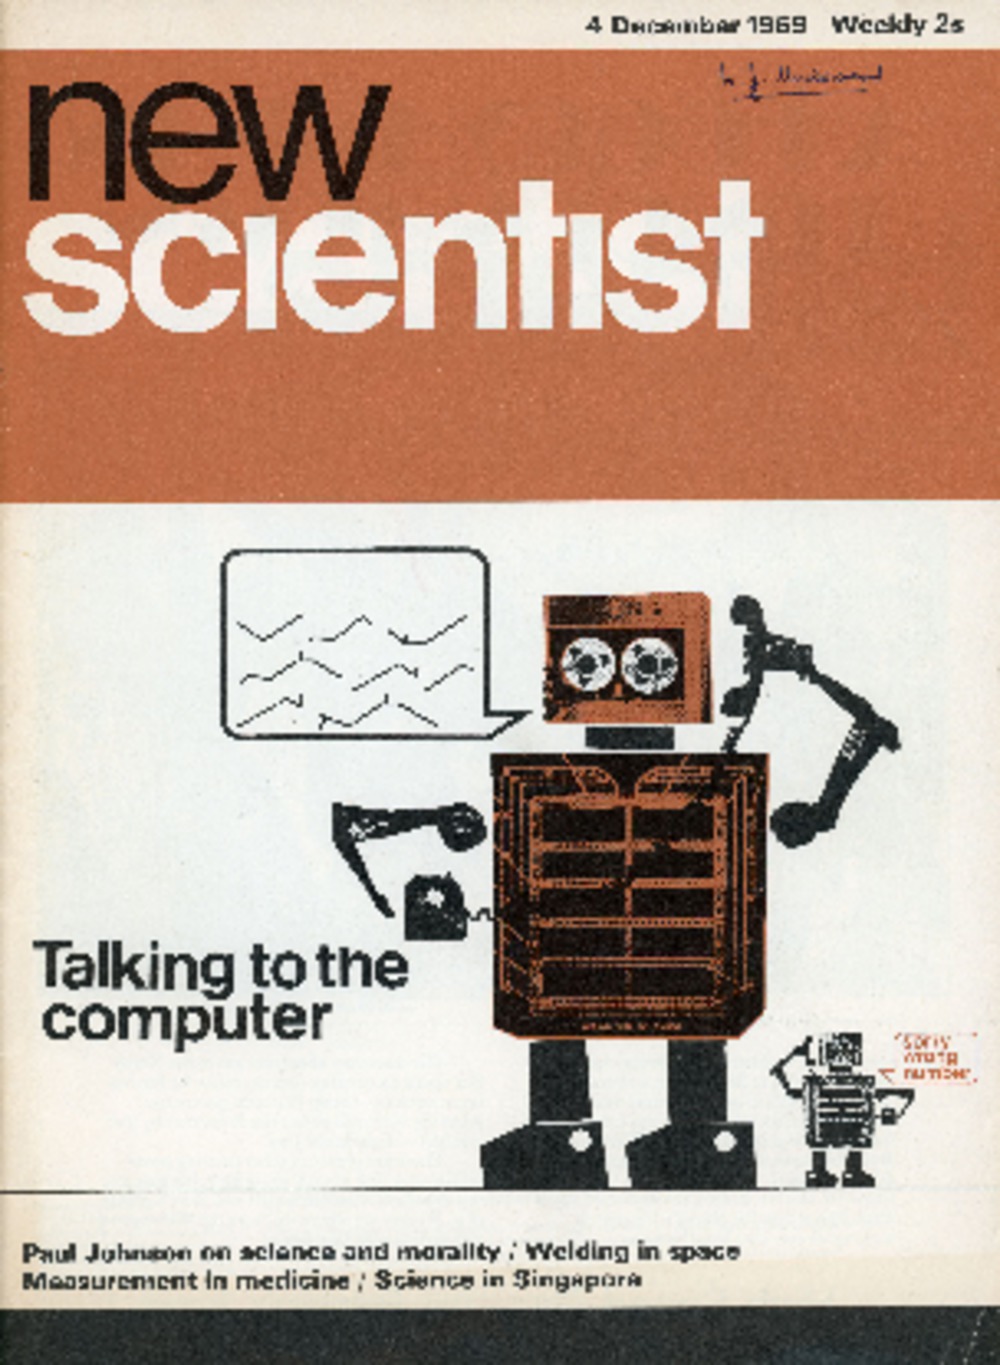 Article: 64072 Talking to The Computer - Article in New Scientist, Dec 1960